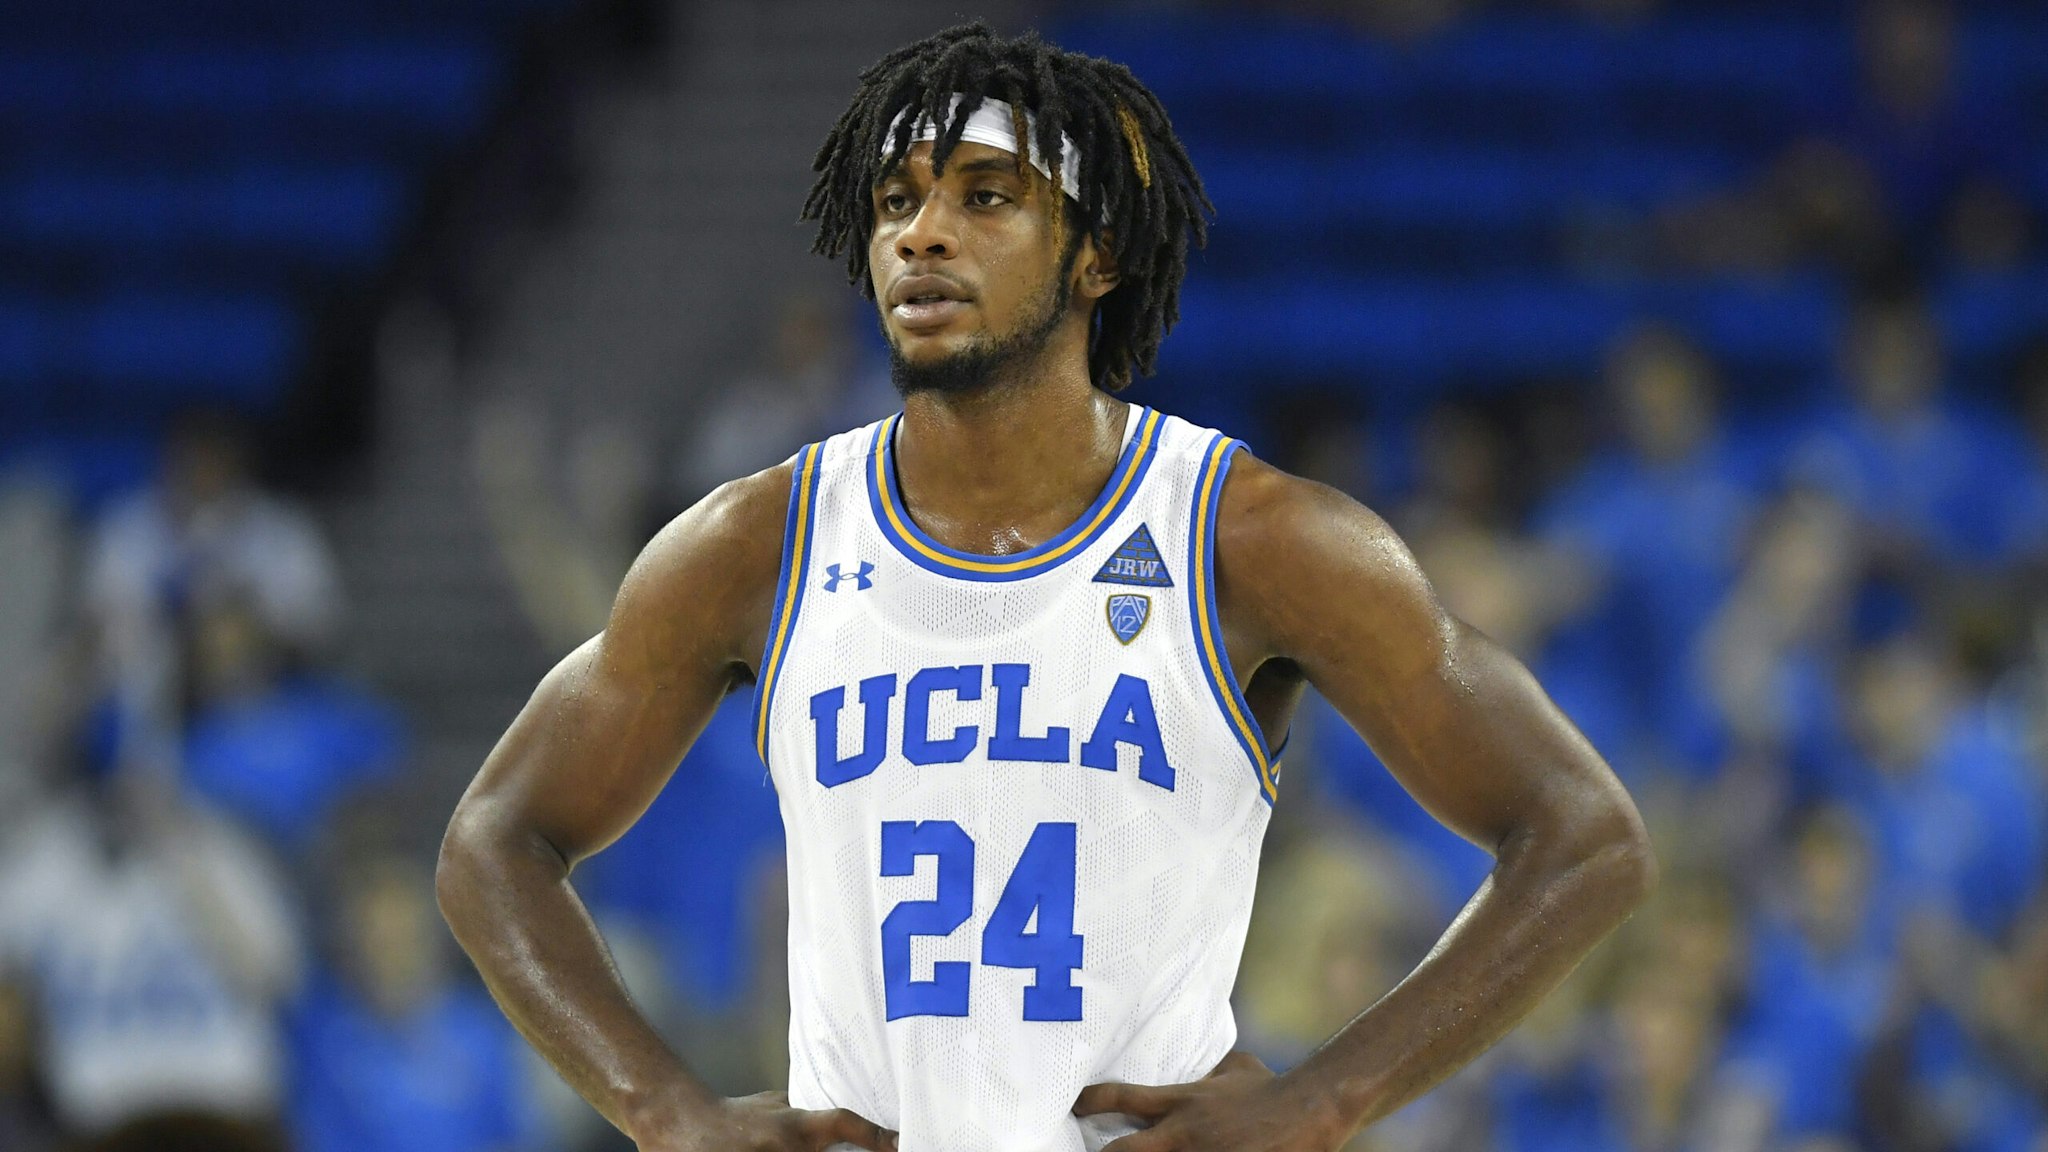 LOS ANGELES, CA - JANUARY 15: Jalen Hill #24 of the UCLA Bruins while playing Stanford Cardinal at Pauley Pavilion on January 15, 2020 in Los Angeles, California.